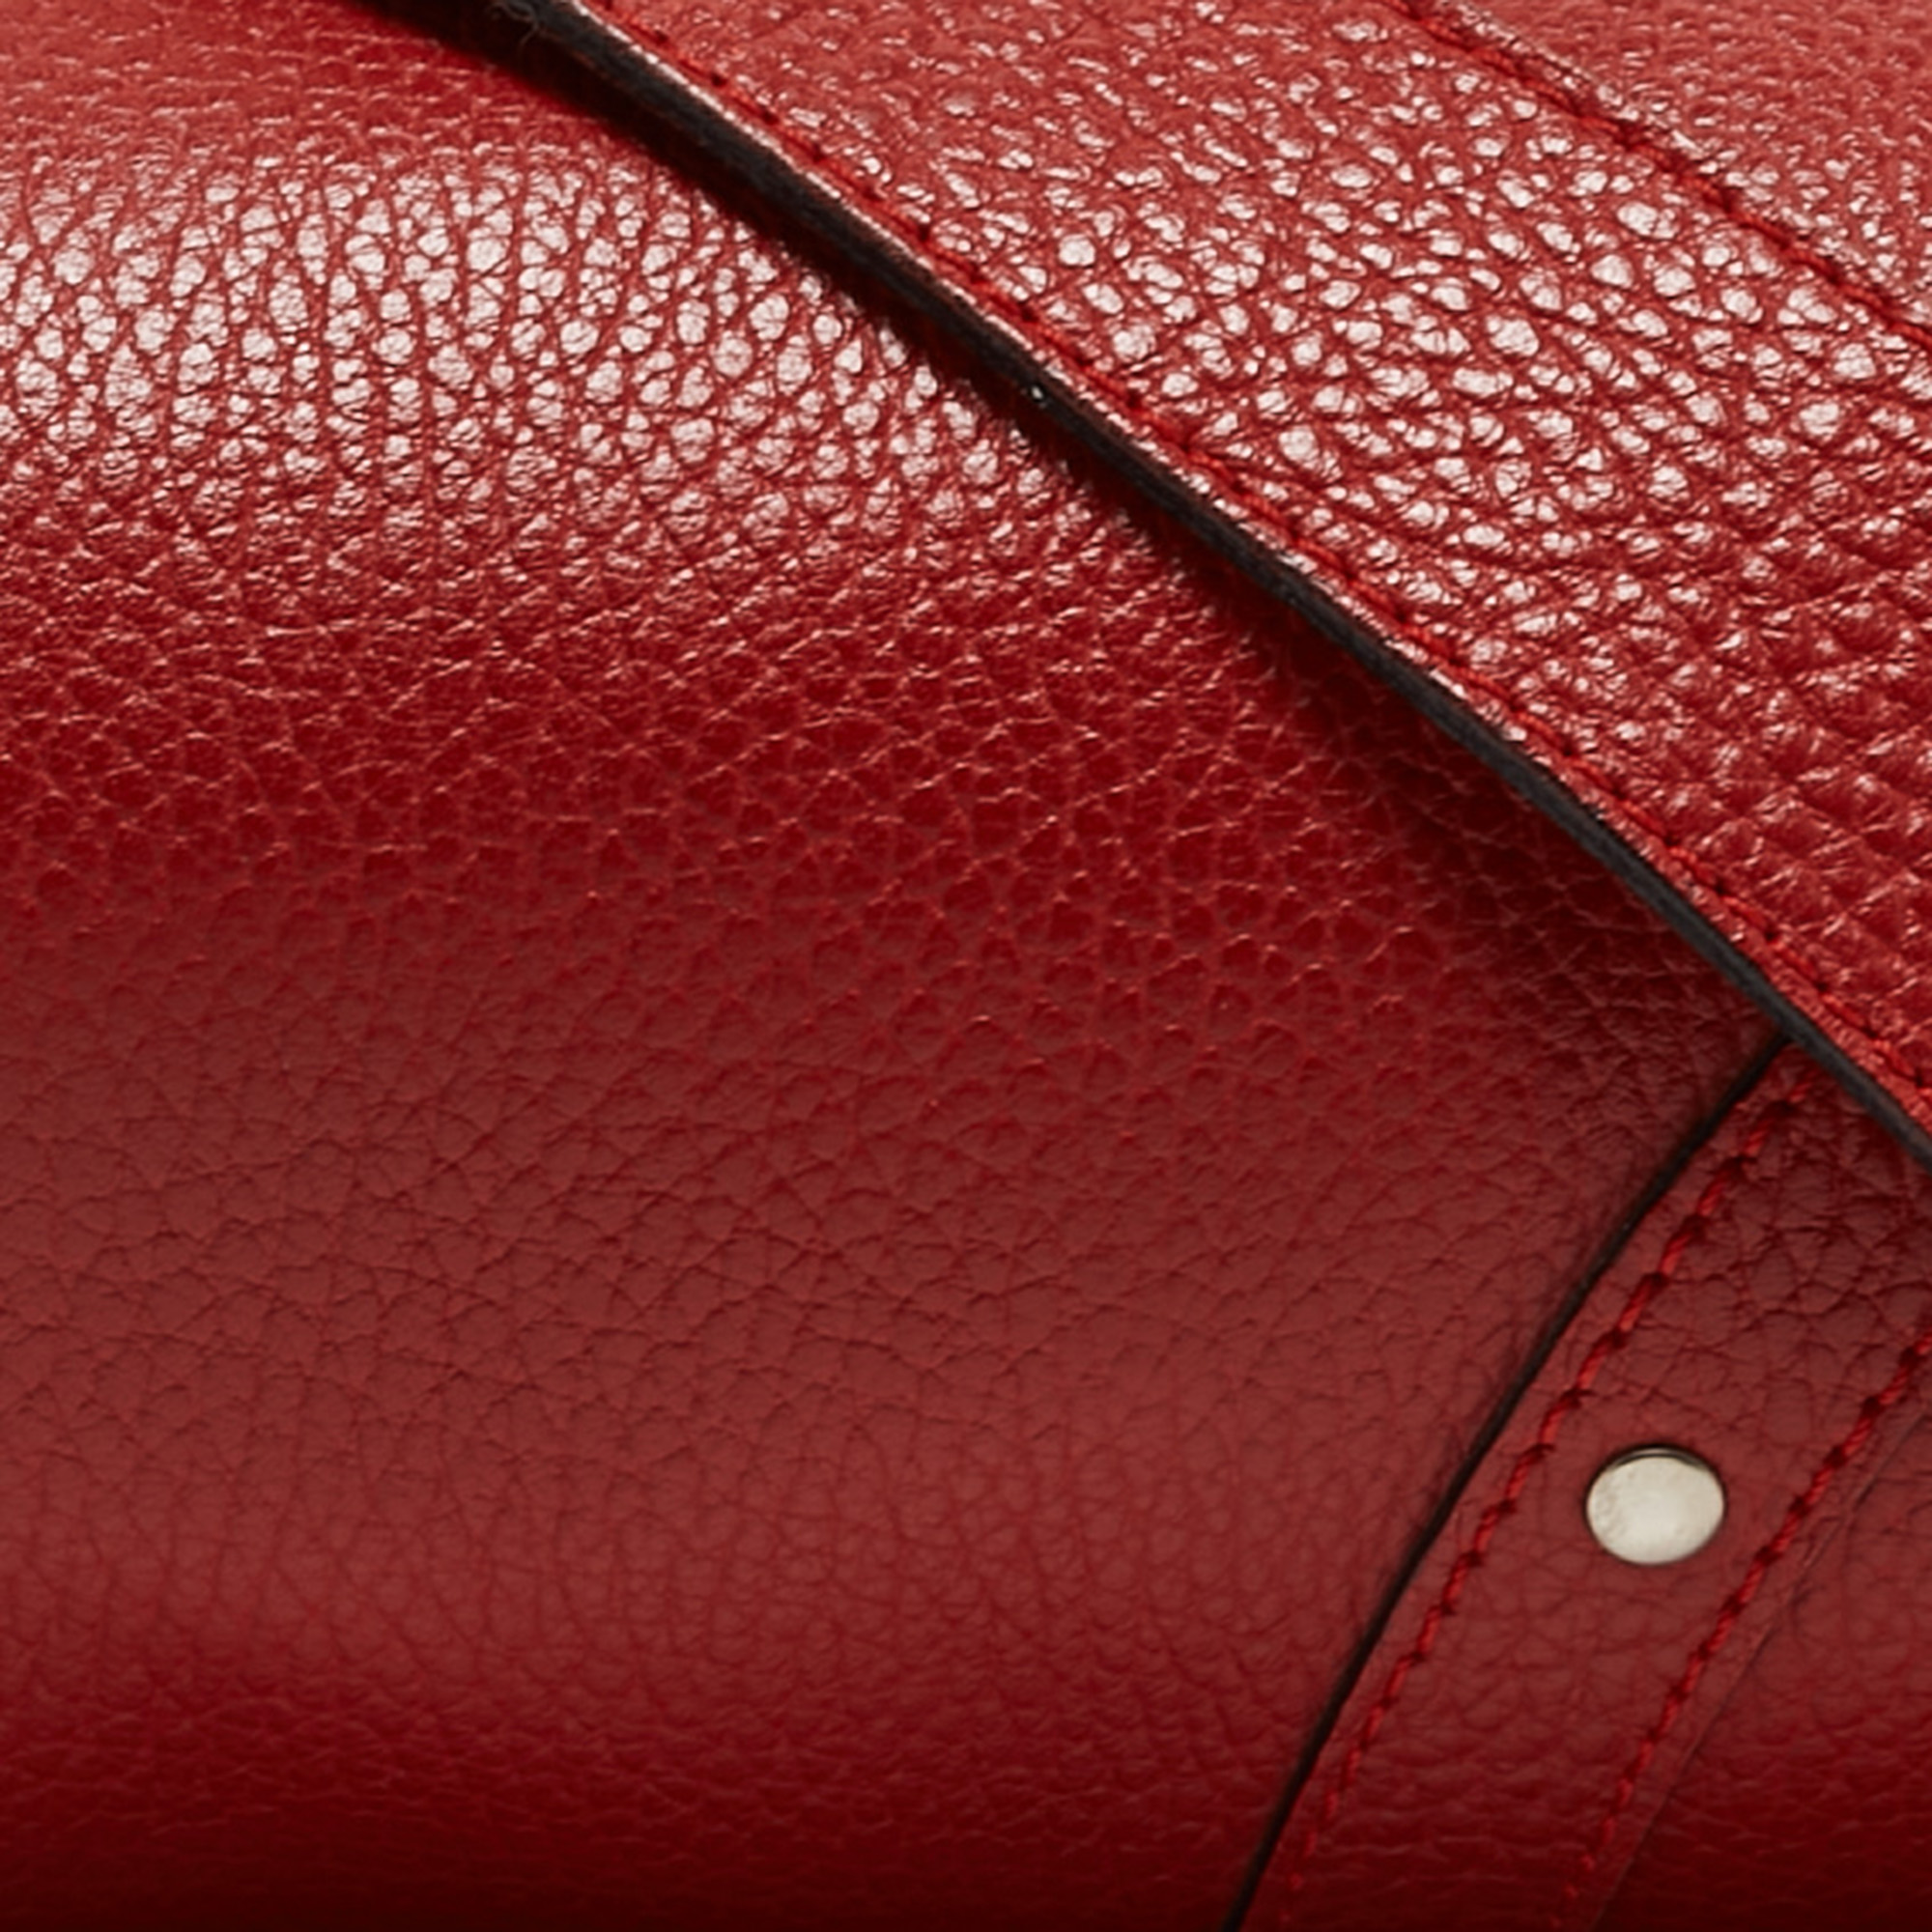 Burberry Red Leather Barrel Bag